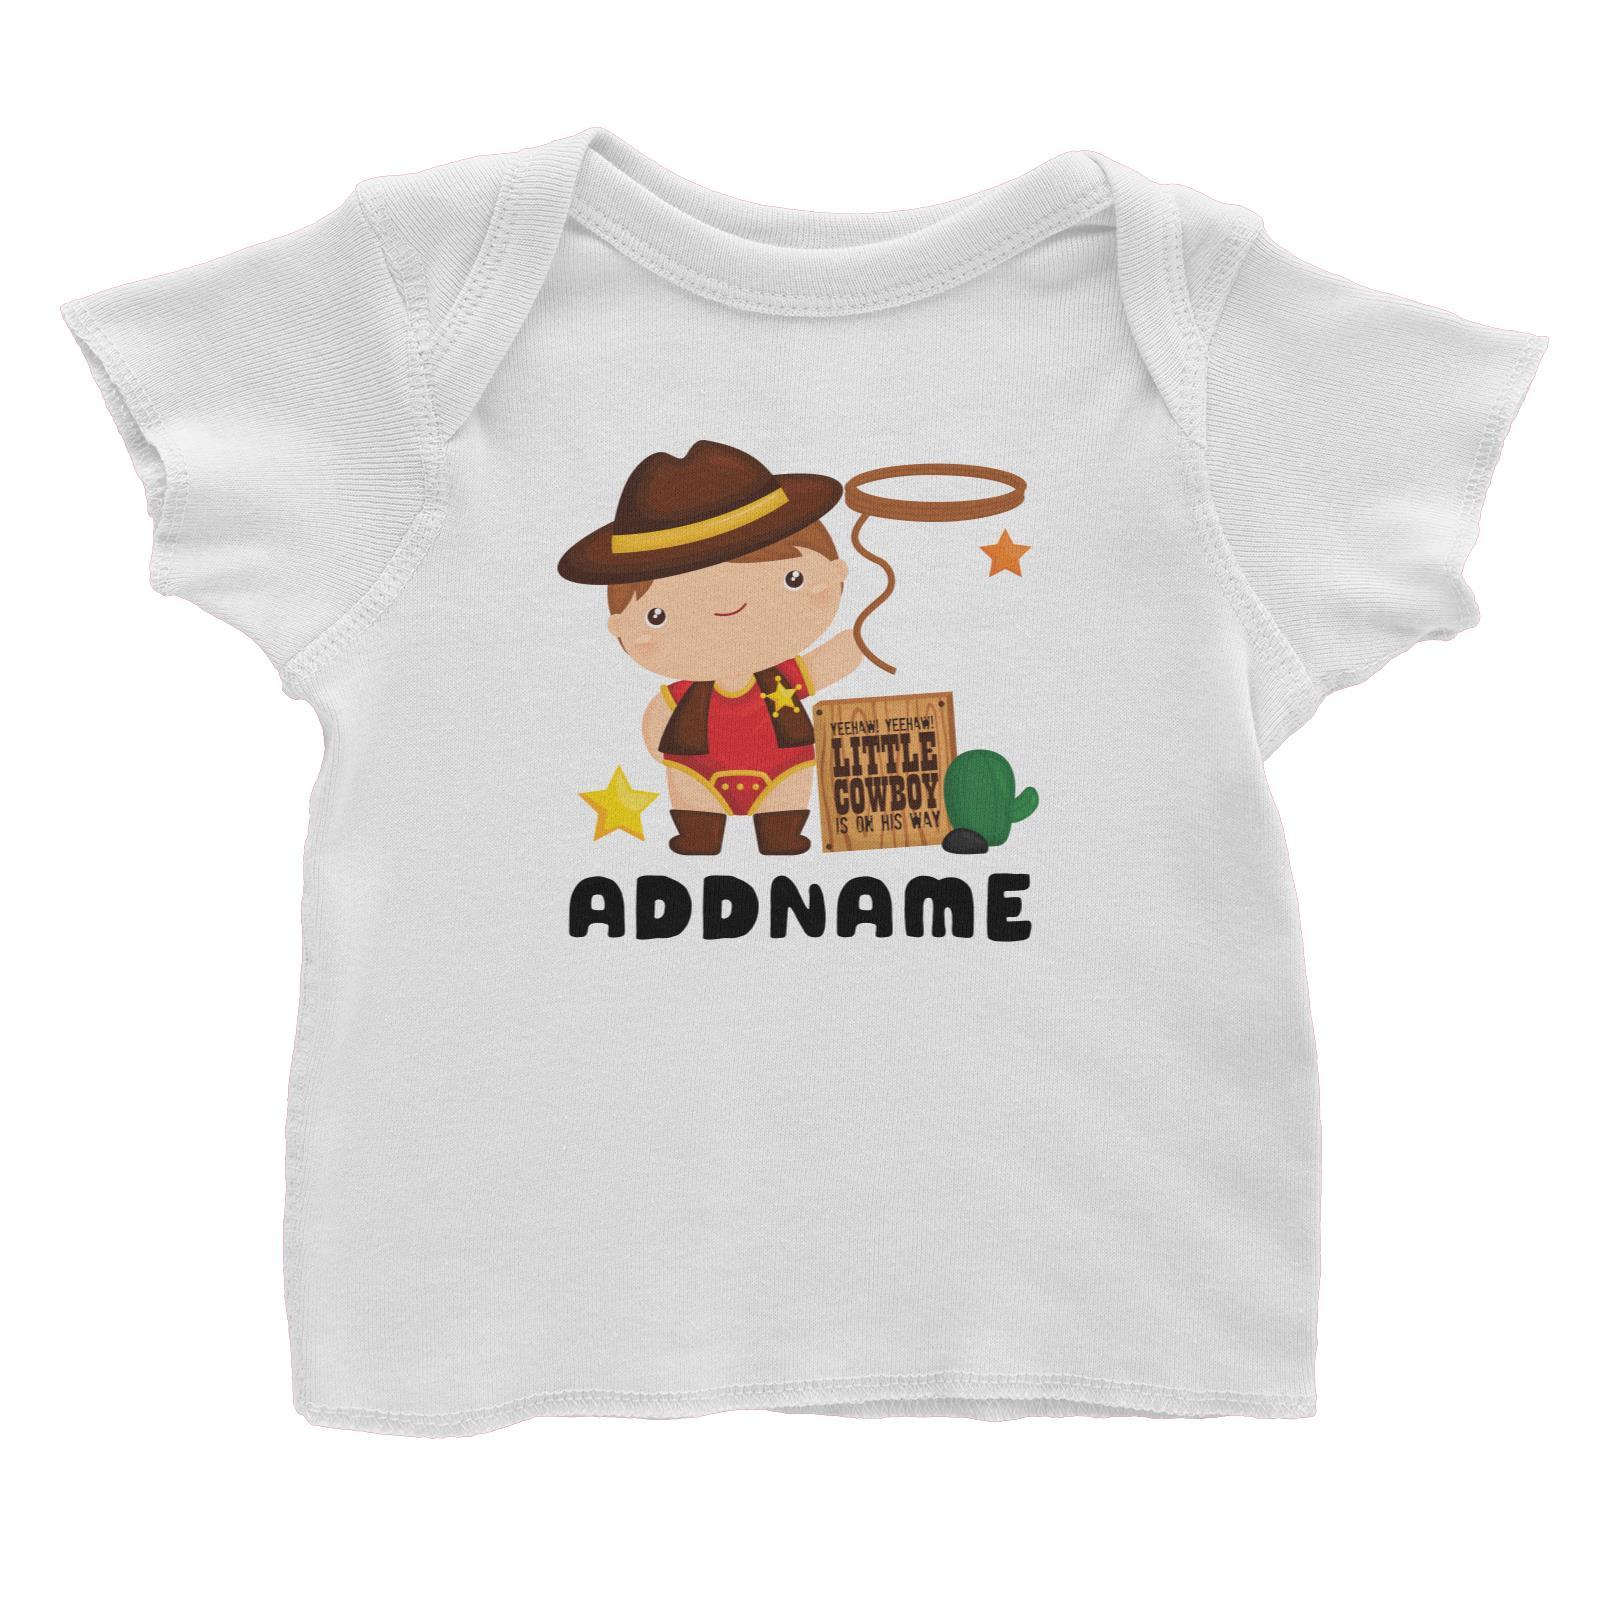 Birthday Cowboy Style Yeehaw Little Cowboy Is On His Way Addname Baby T-Shirt